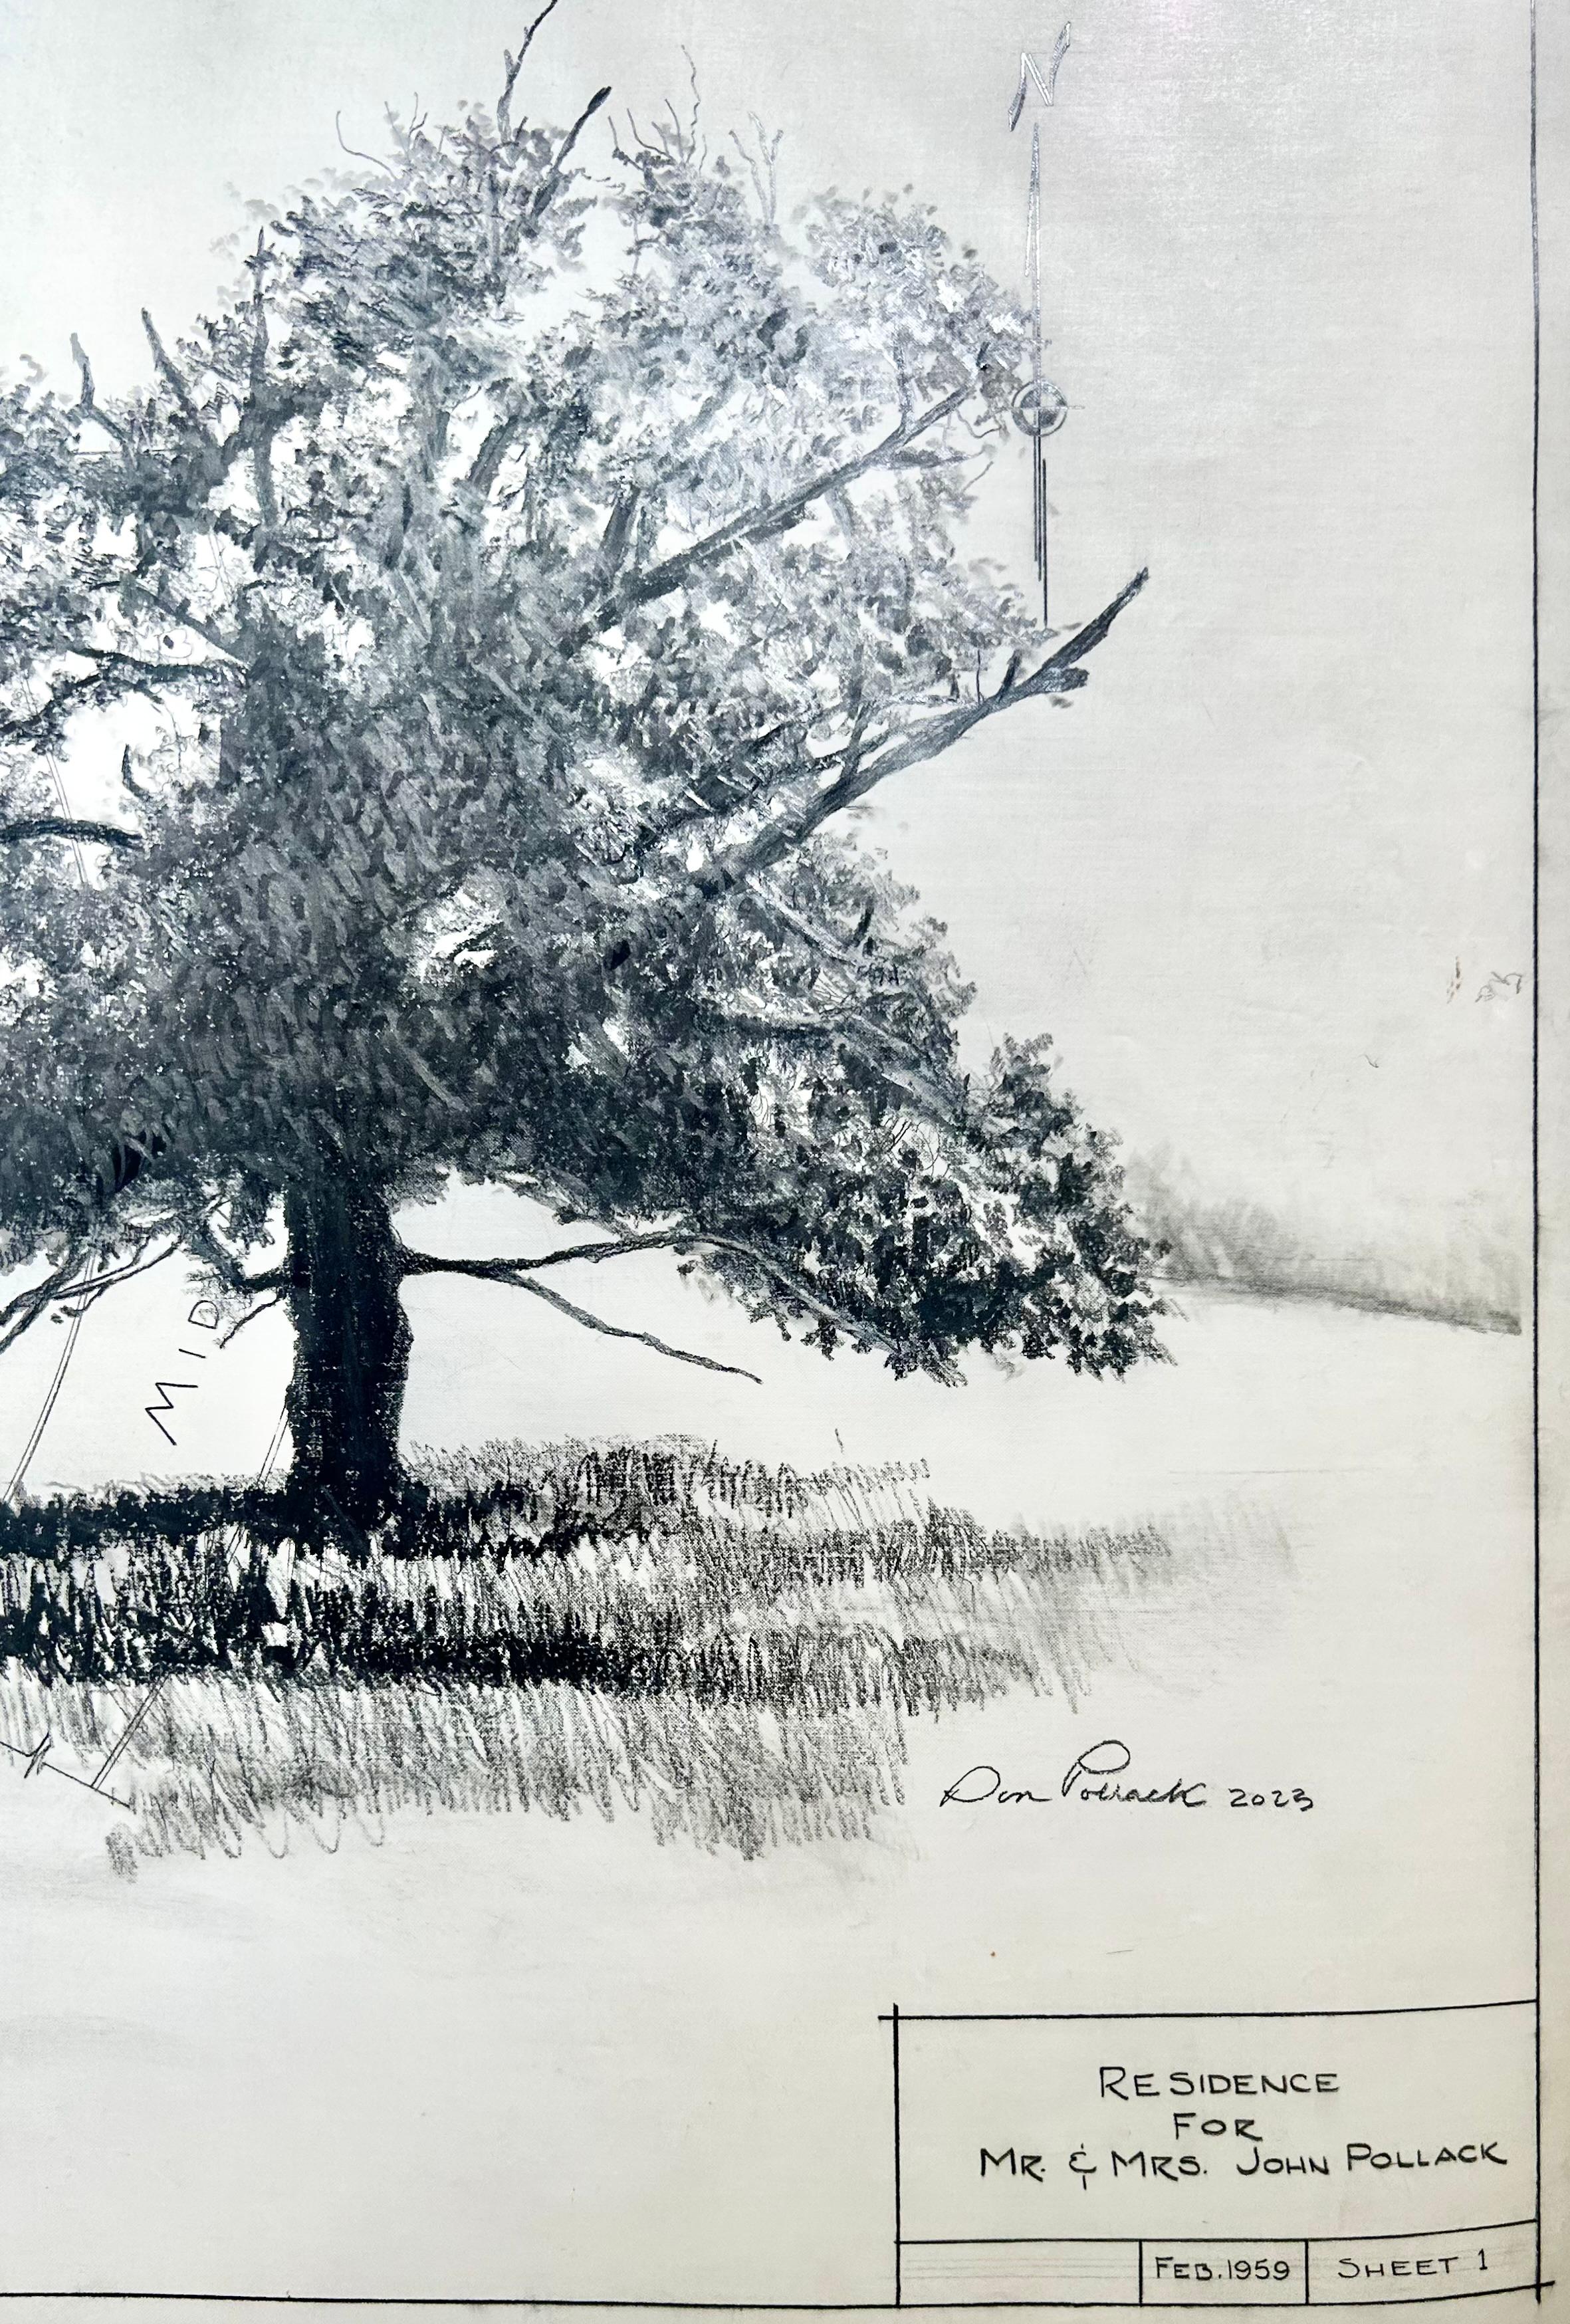 Plat Survey - Trees in Graphite on Antique Architectural Drawings  - Contemporary Art by Don Pollack